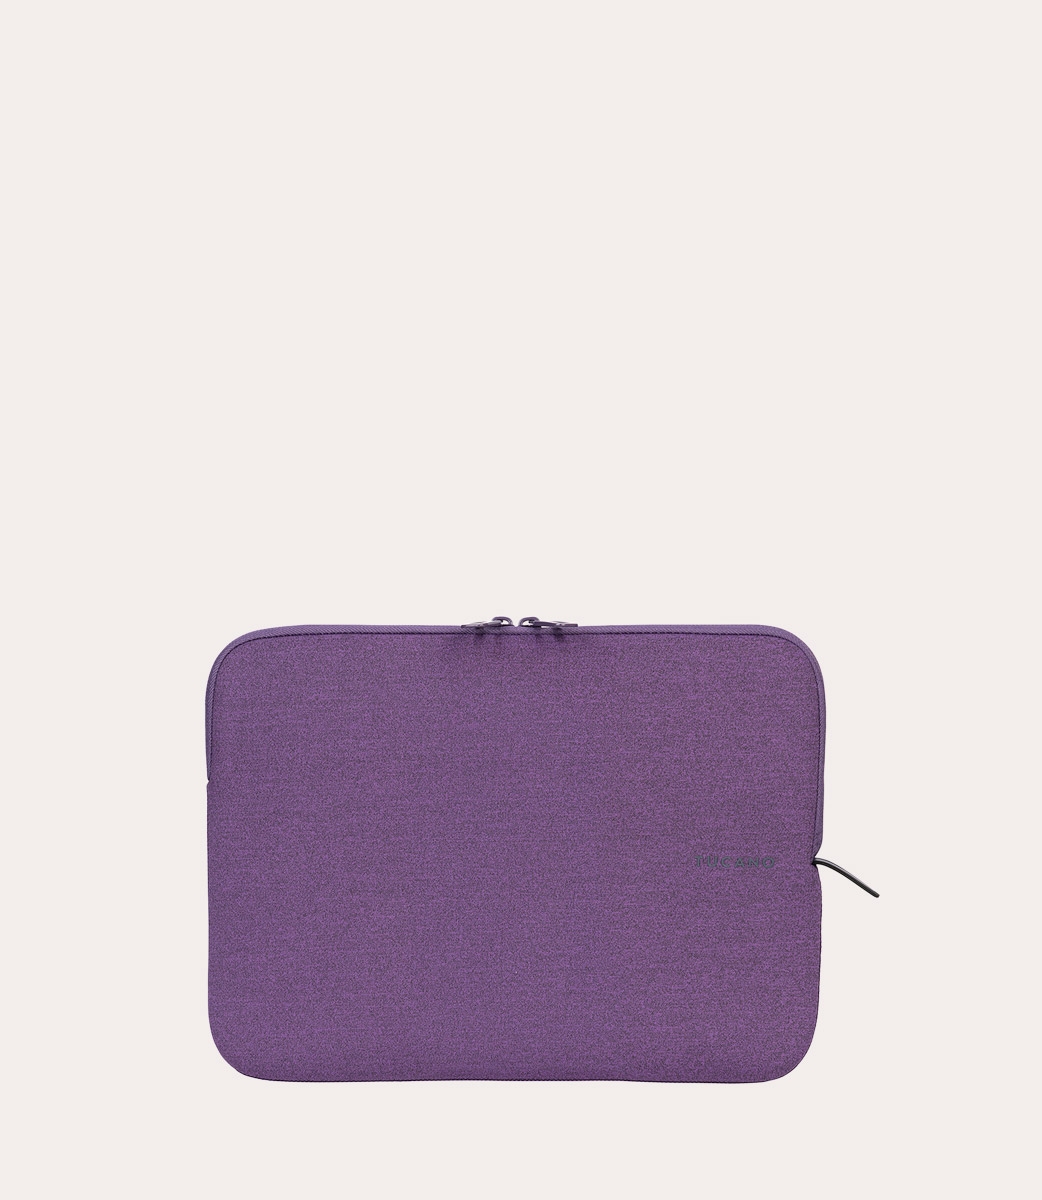 Stretchy case made with material Colors Purple - Tucano